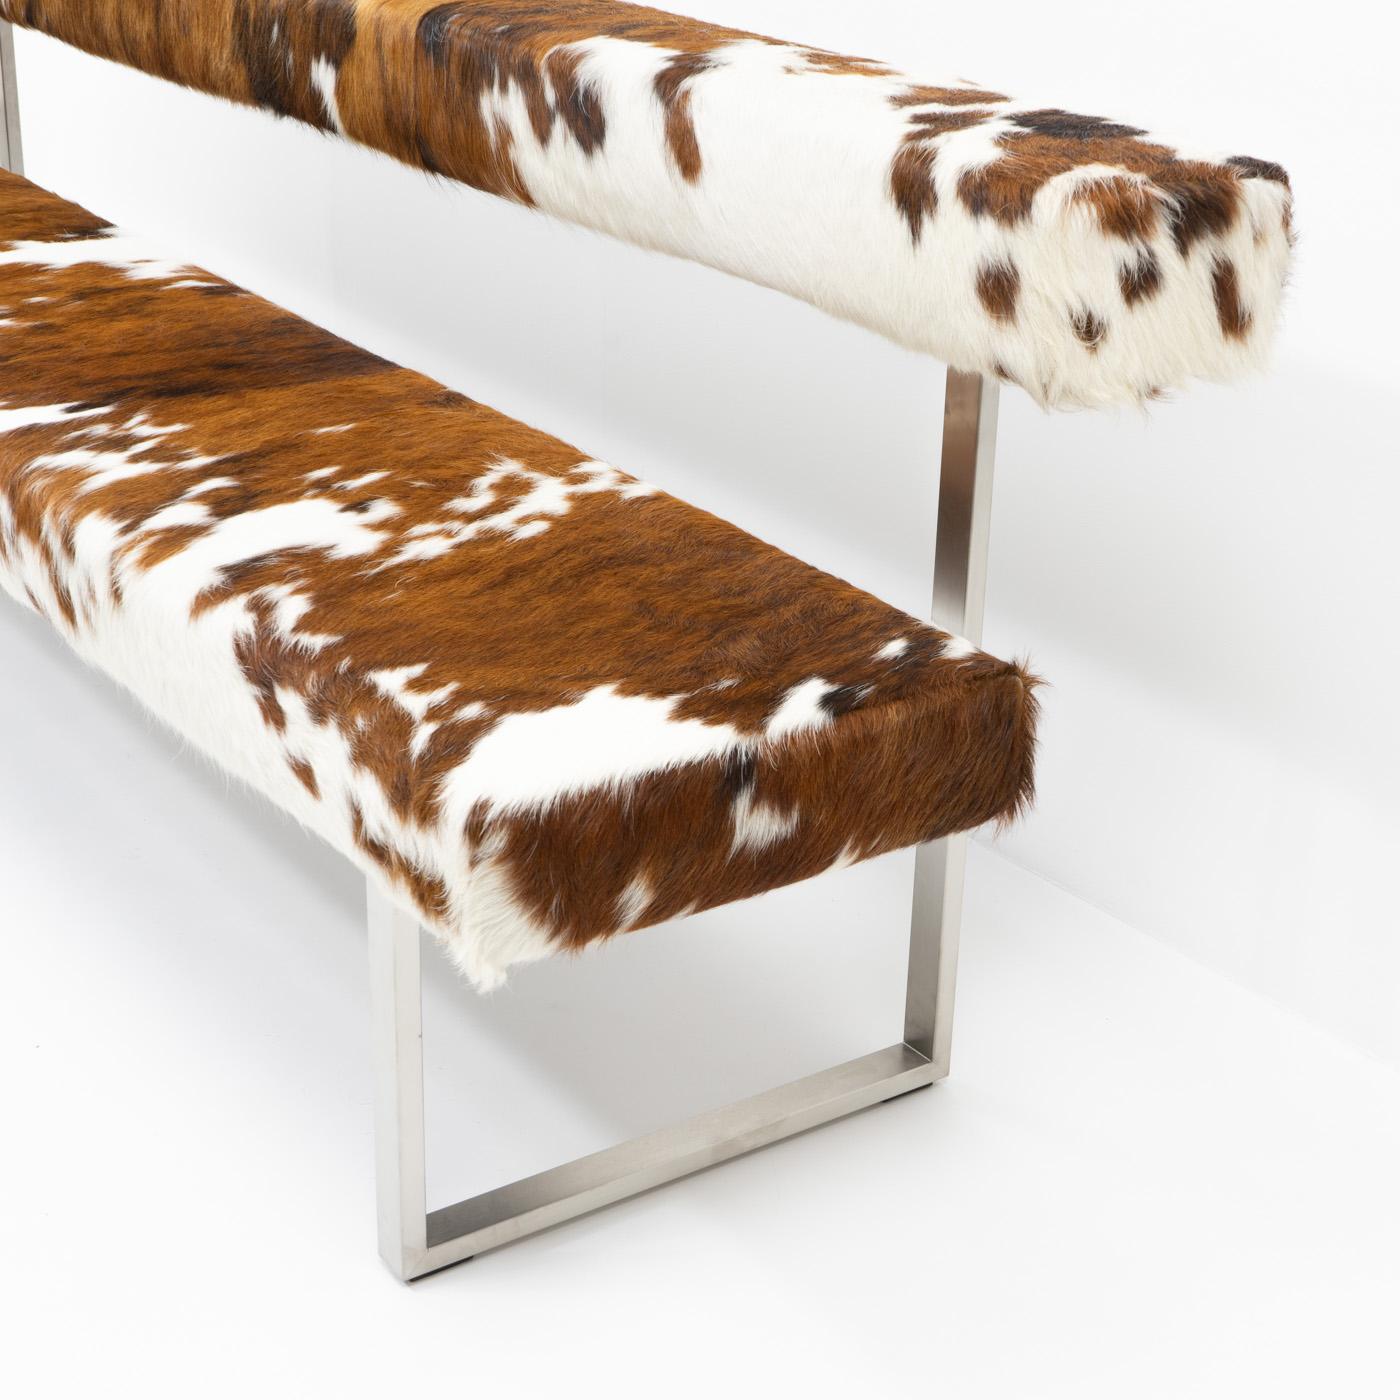 Swiss Design Permesso Bench in cowhide, by Girsberger - 2000s For Sale 1